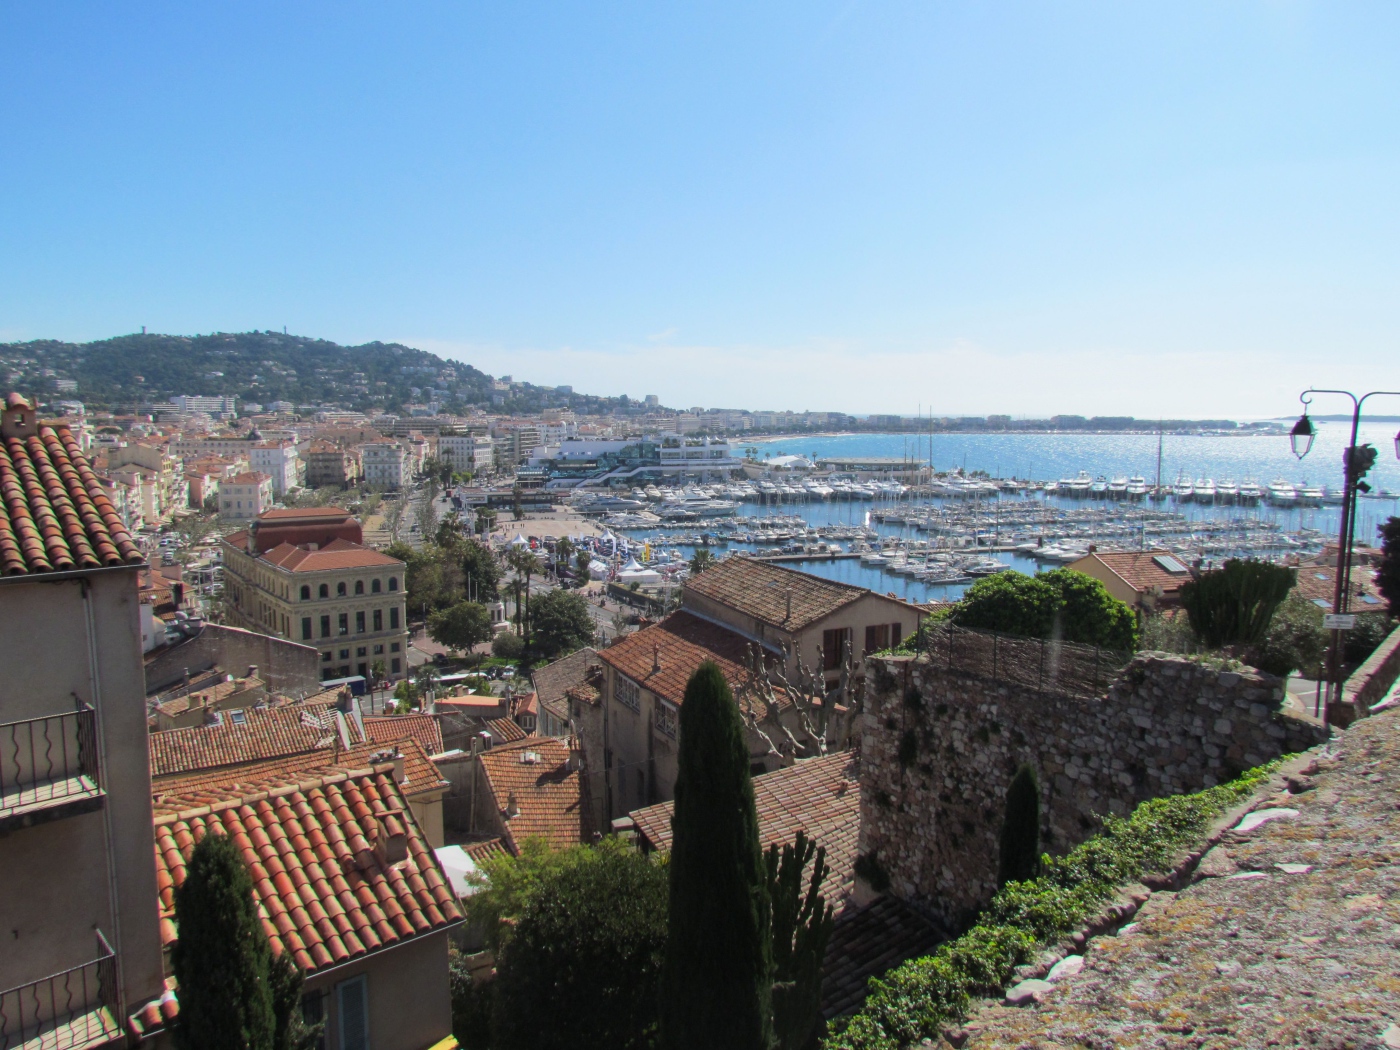 View from the hill in Cannes, France